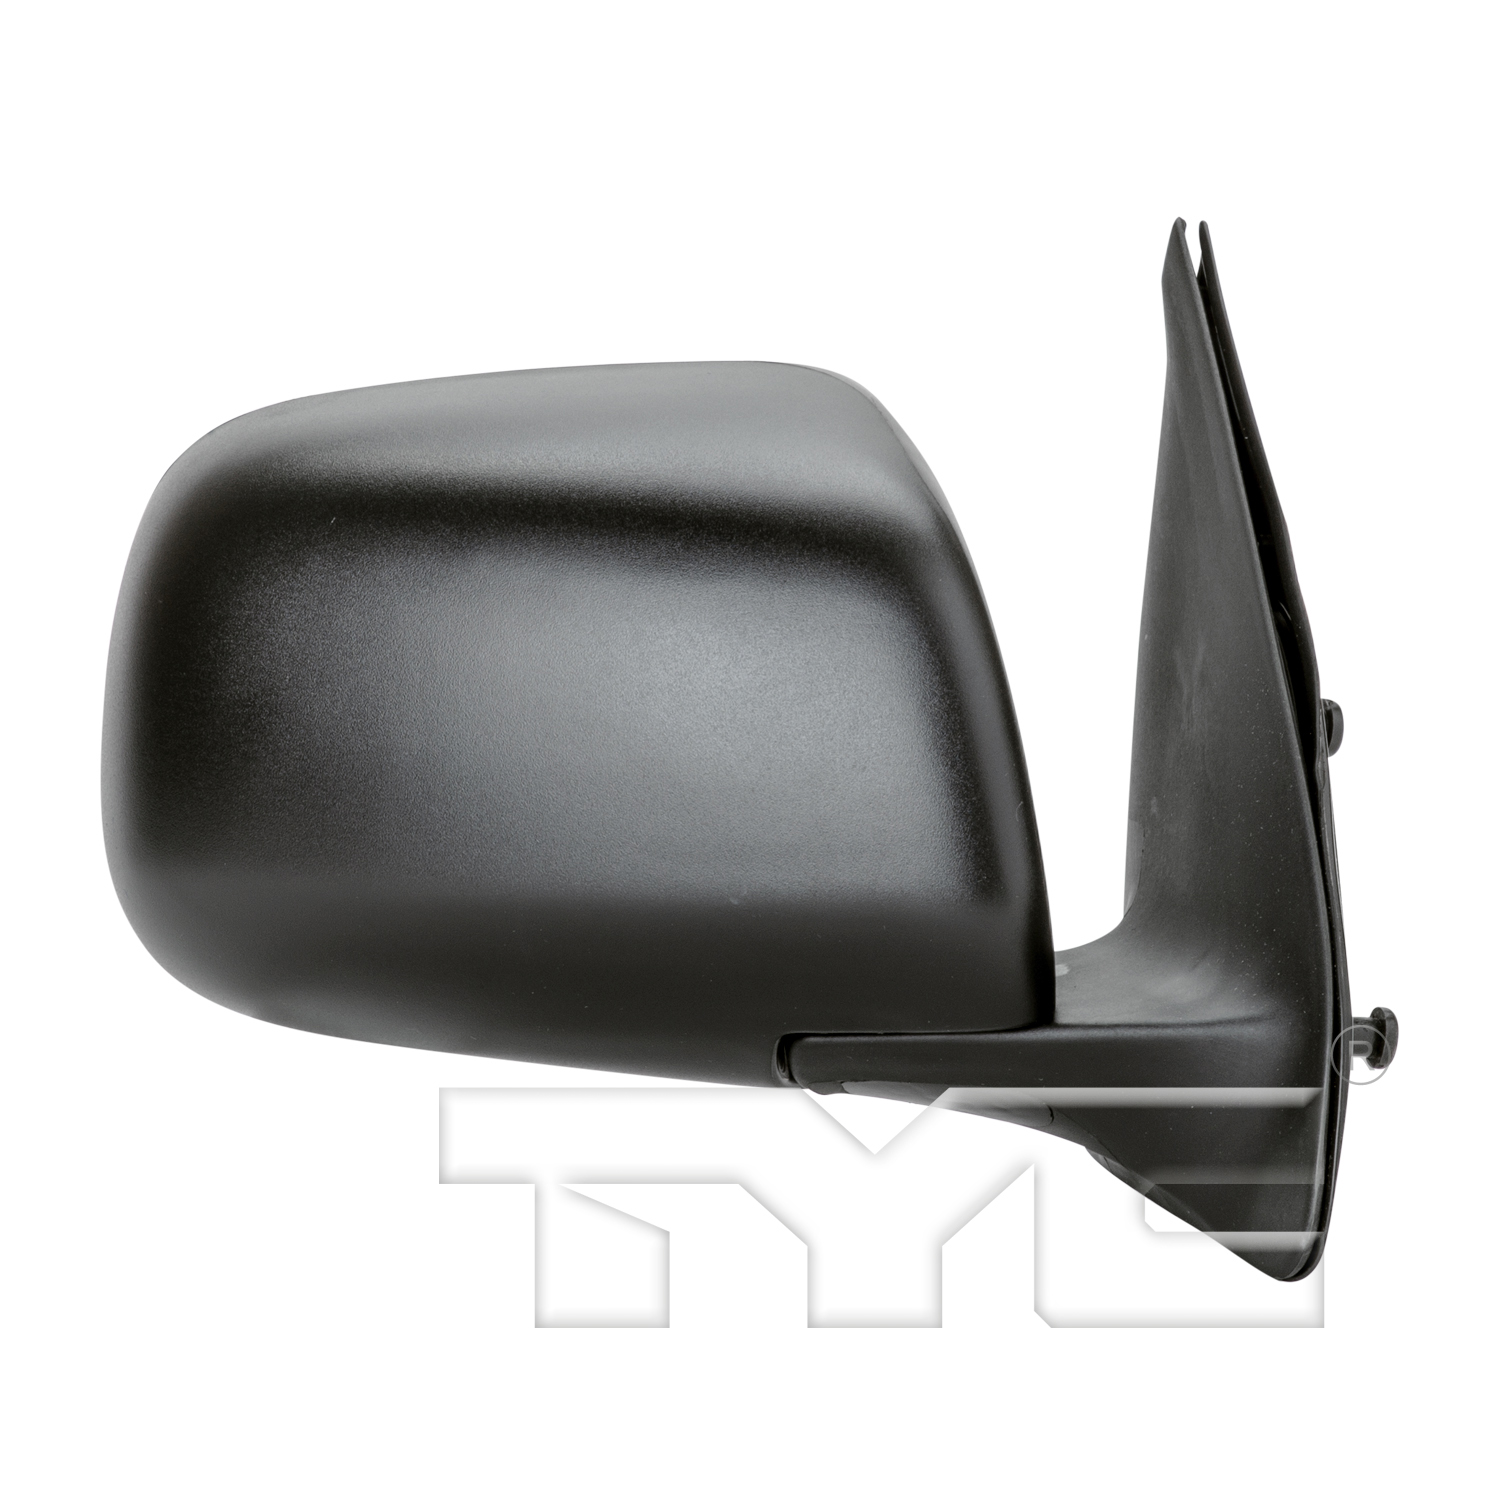 Aftermarket MIRRORS for TOYOTA - TACOMA, TACOMA,05-11,RT Mirror outside rear view